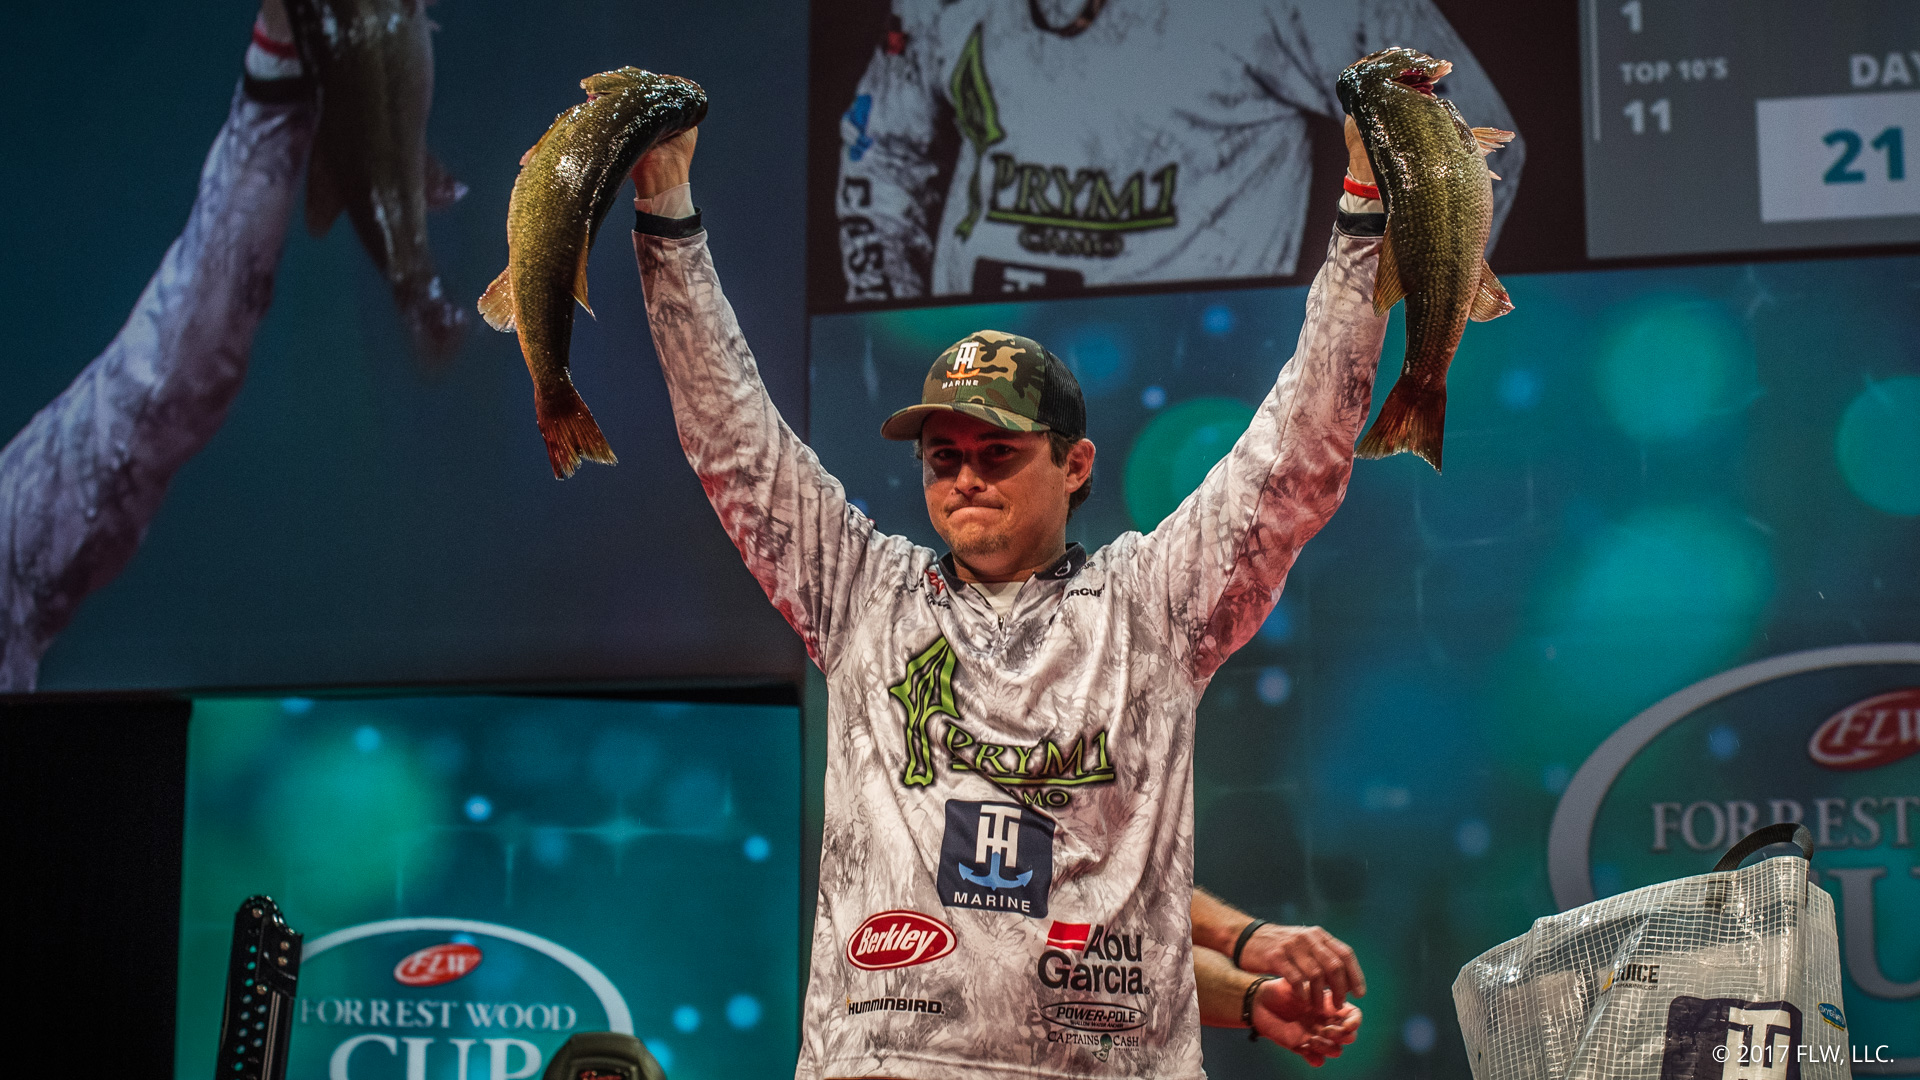 FLW Tour rookie Justin Atkins of Florence, Alabama, secured the early lead at the 2017 Forrest Wood Cup Thursday after weighing in a five-bass limit totaling 21 pounds, 5 ounces – the largest limit ever weighed on Lake Murray in Forrest Wood Cup competition.